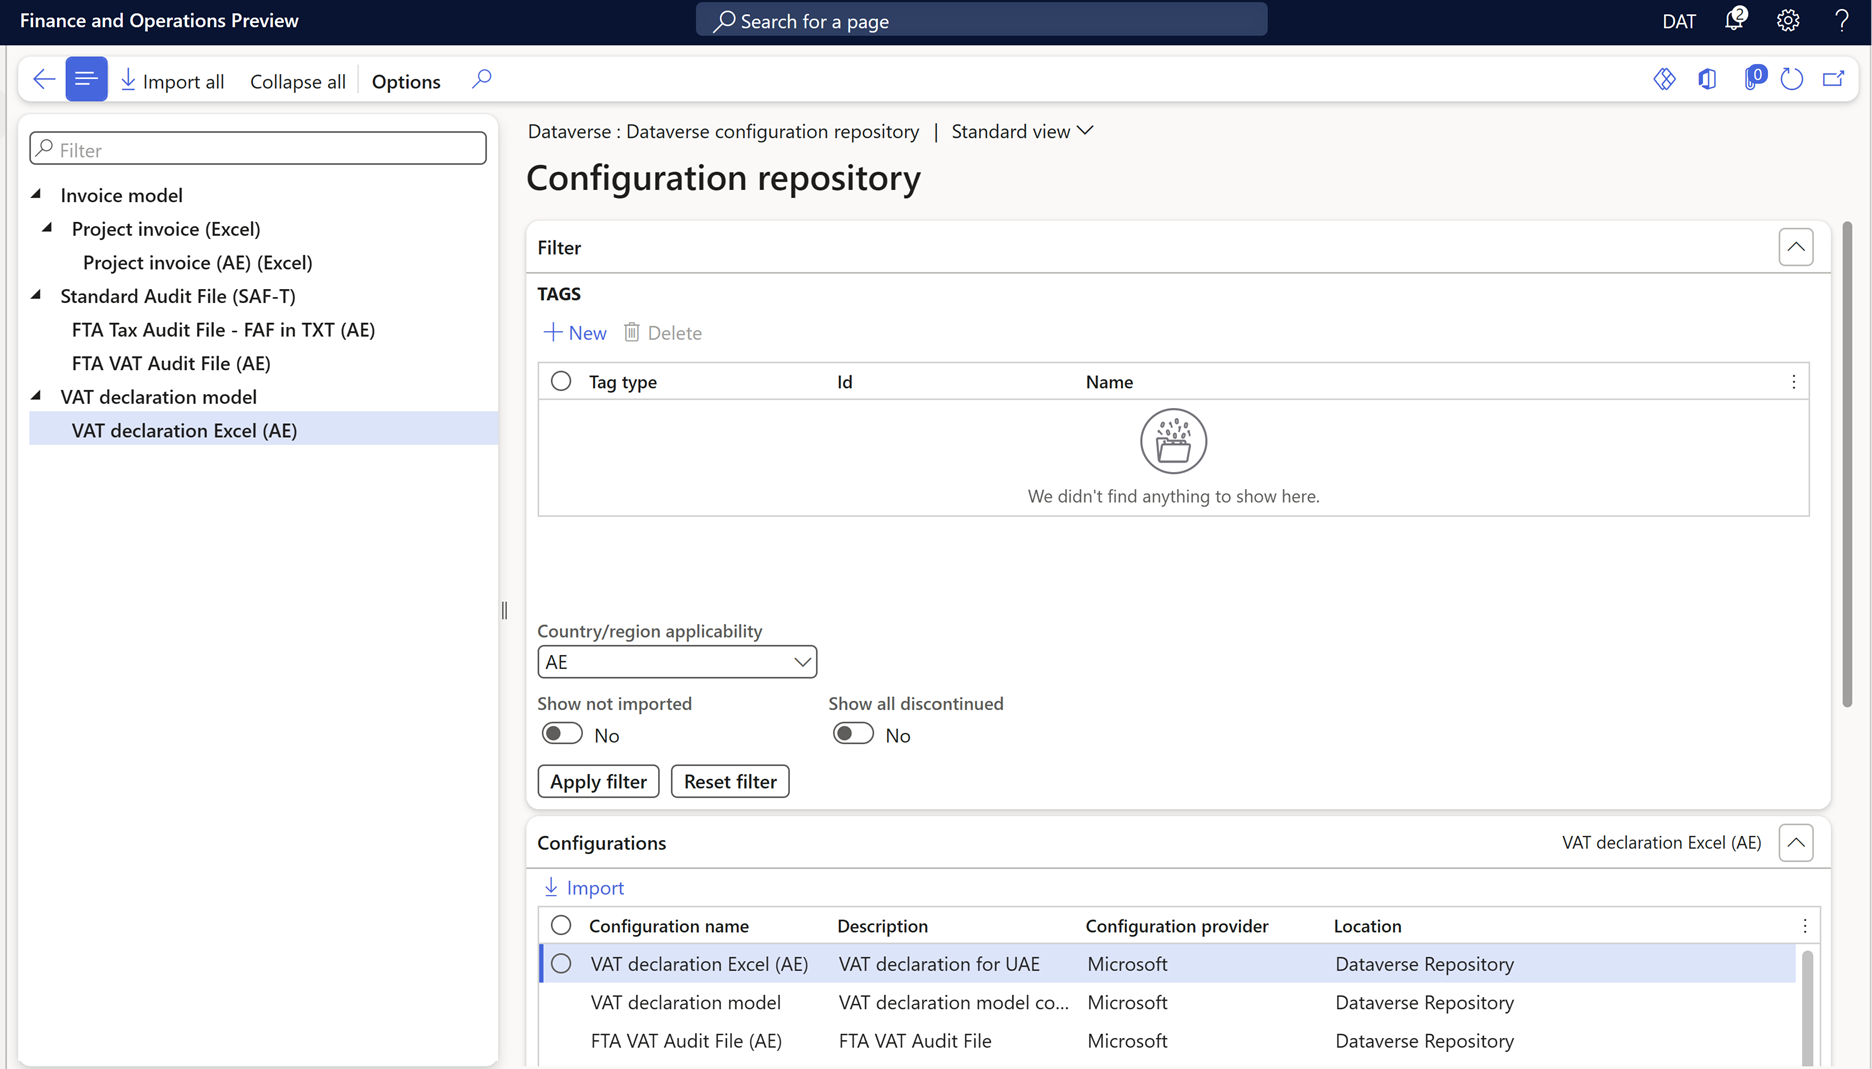 Screenshot of the Configuration repository page, where a Country/region applicability filter is applied.